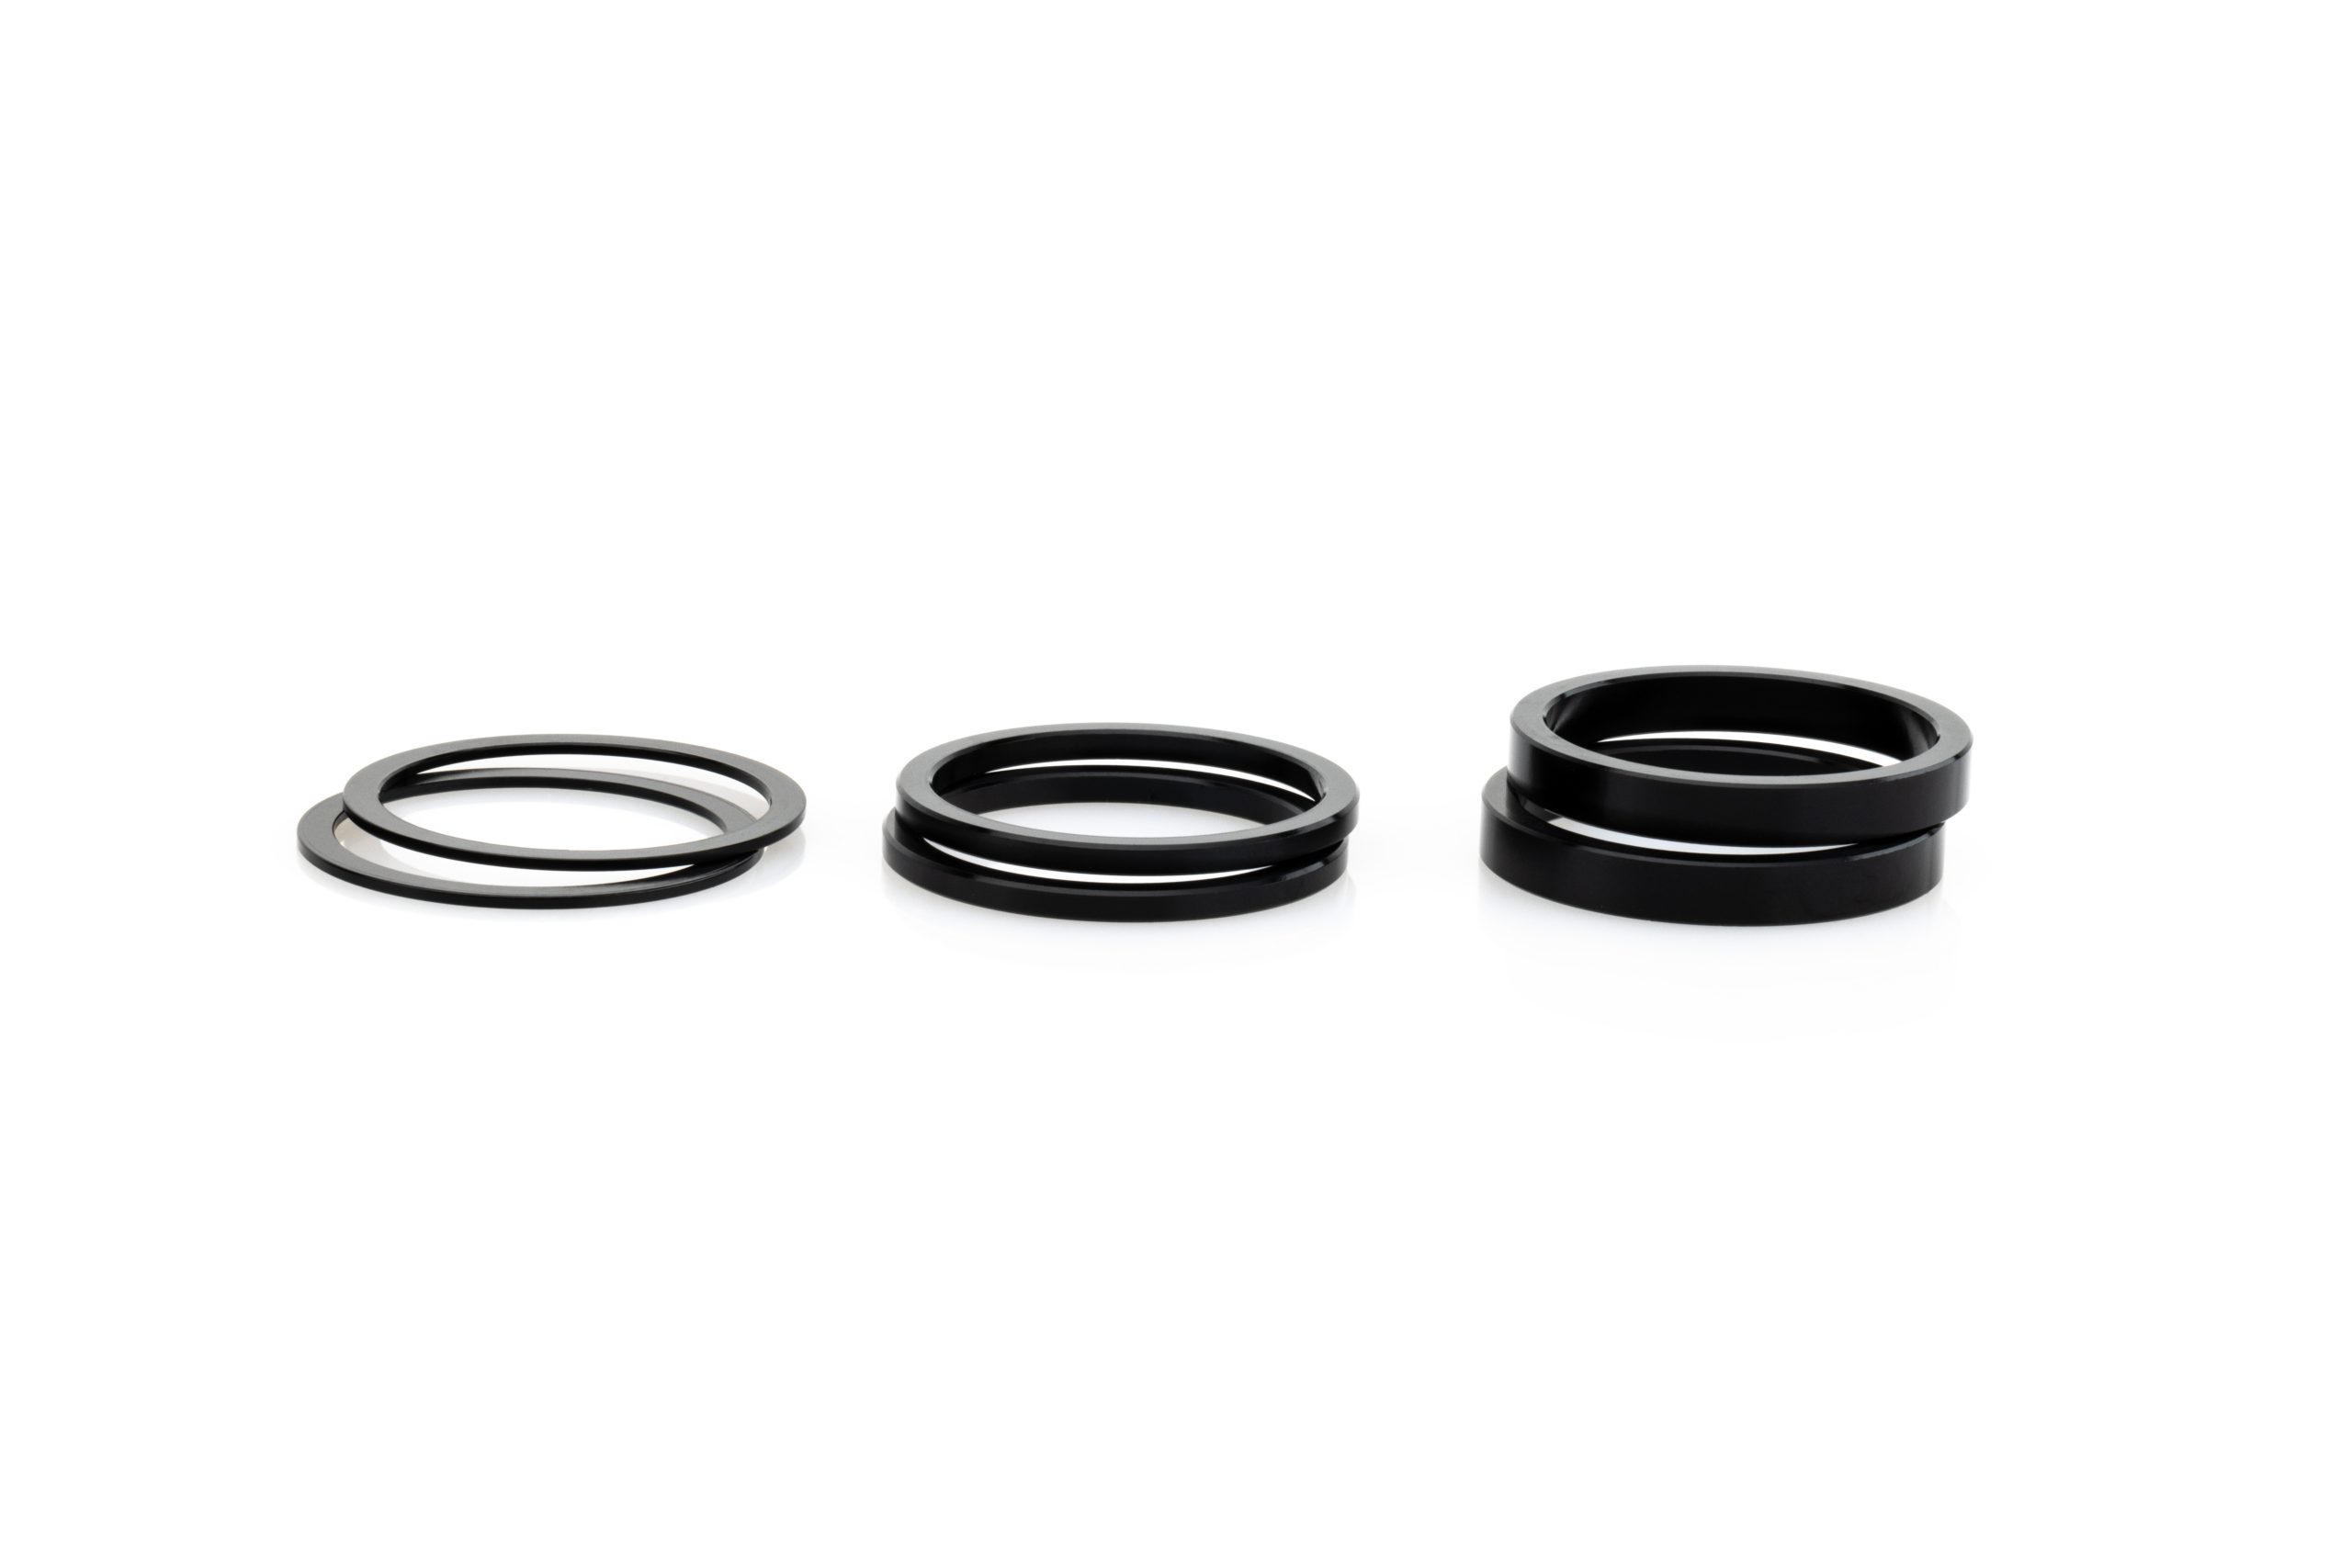 30mm Spindle Spacer Kit - BAI0198 - Cane Creek Cycling Components